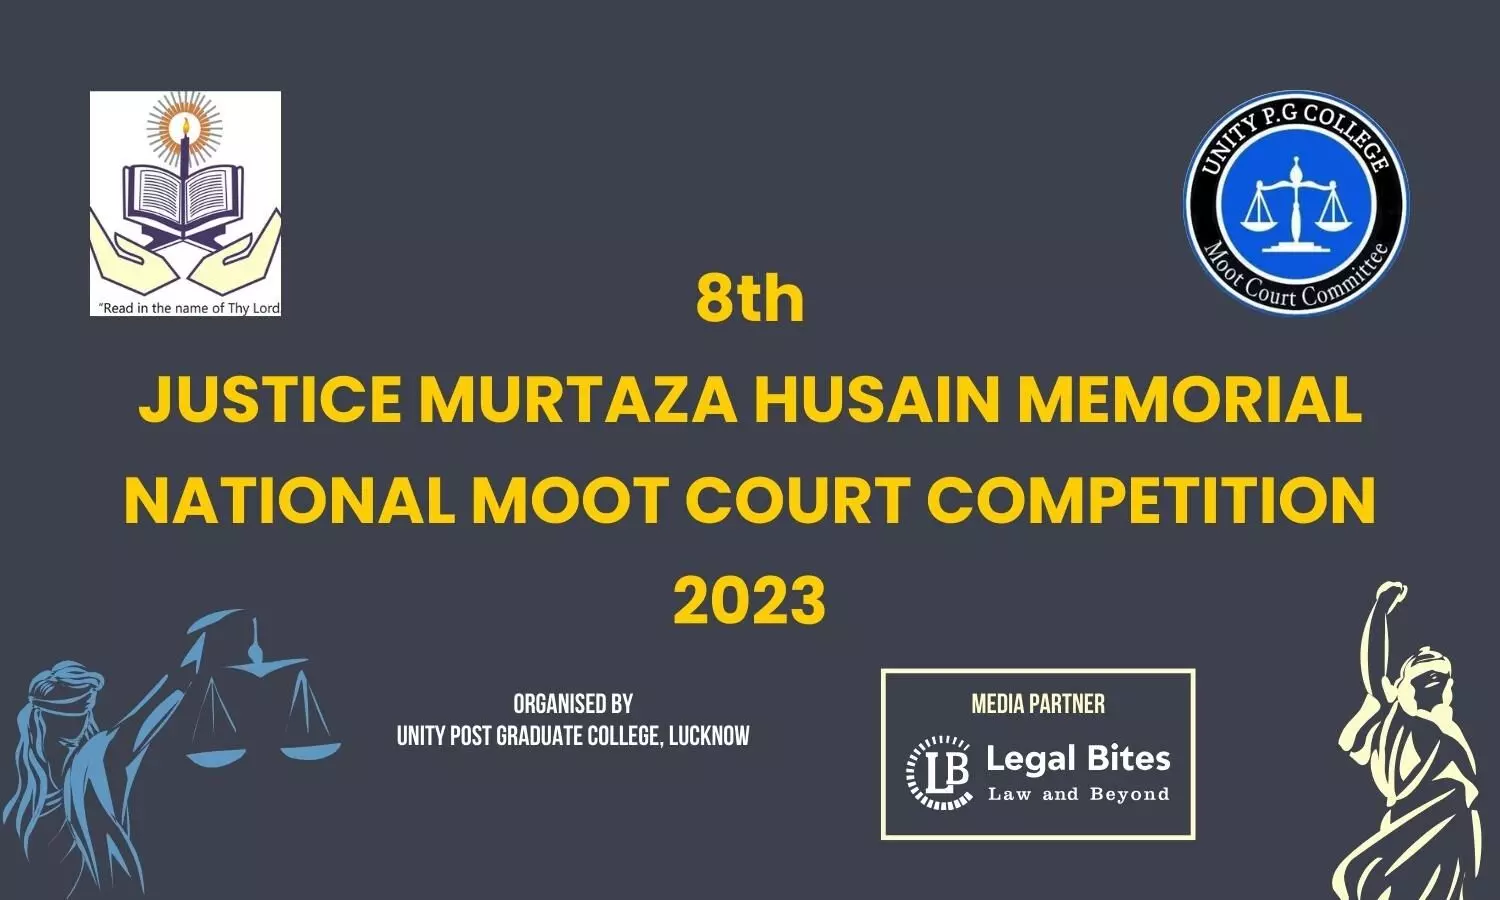 8th Justice Murtaza Husain Memorial National Moot Court Competition 2023 | Unity Post Graduate College, Lucknow